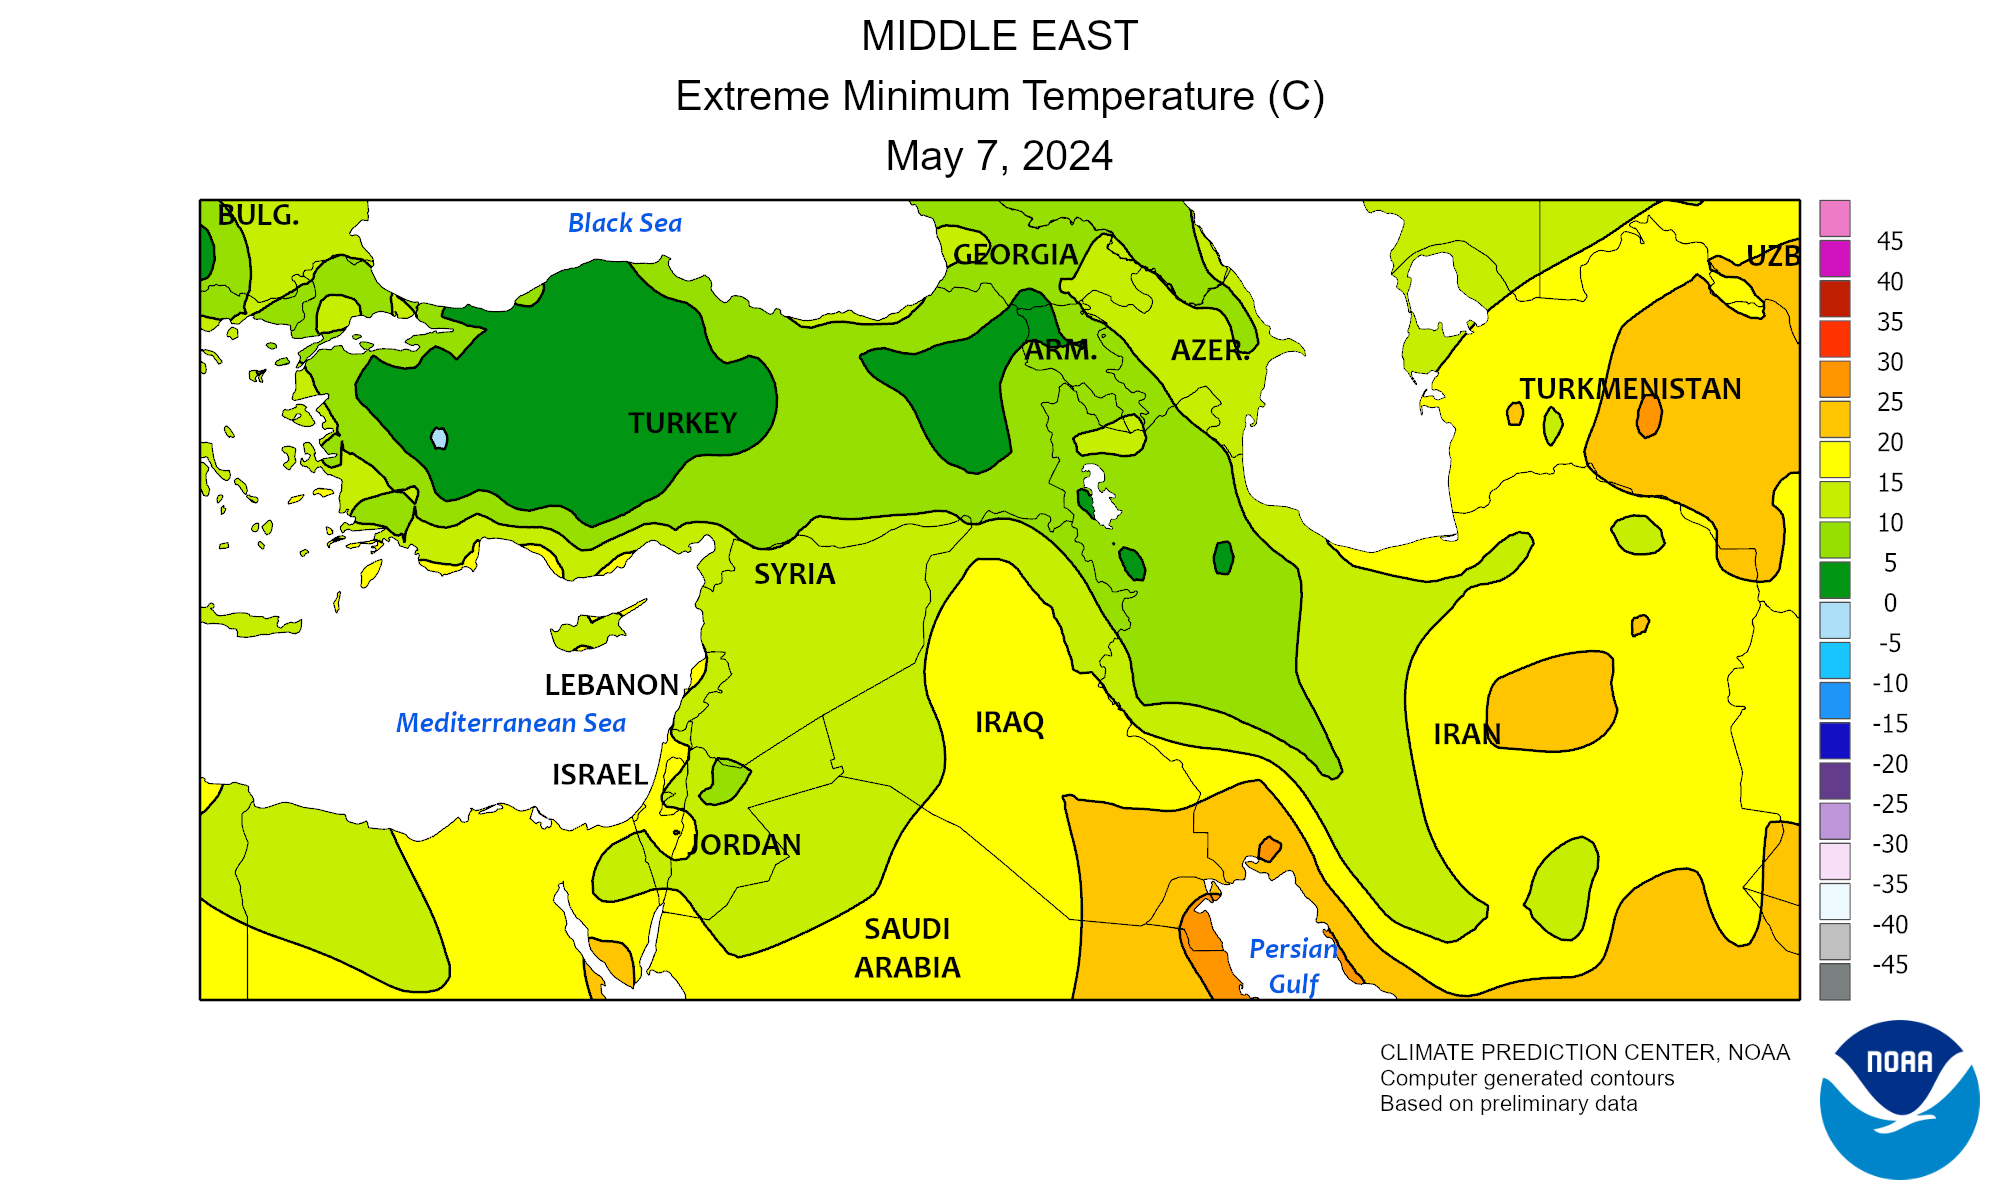 Average temperature in the Middle Eastern countries